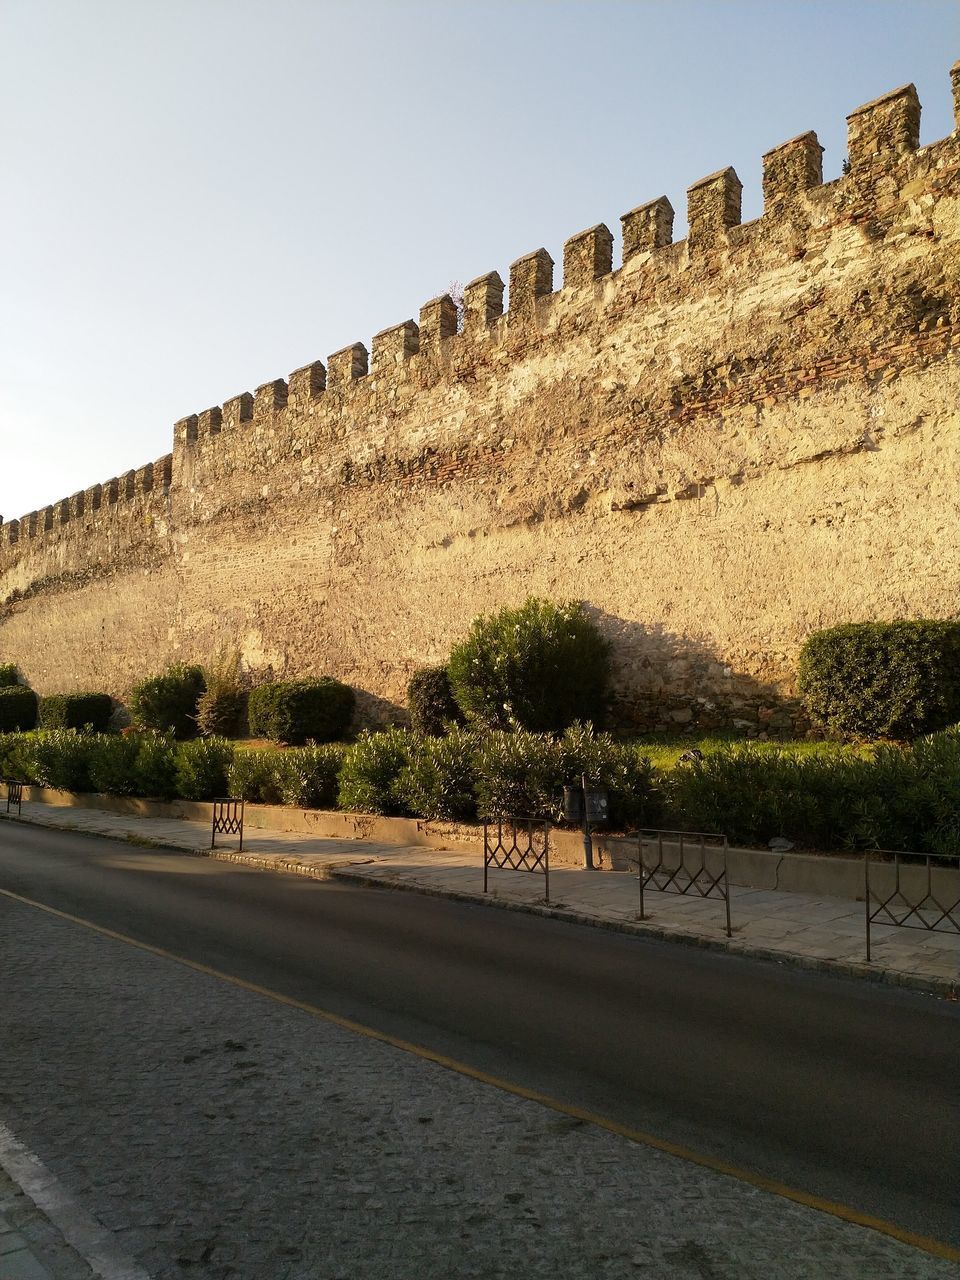 VIEW OF FORT AGAINST THE WALL OF SKY